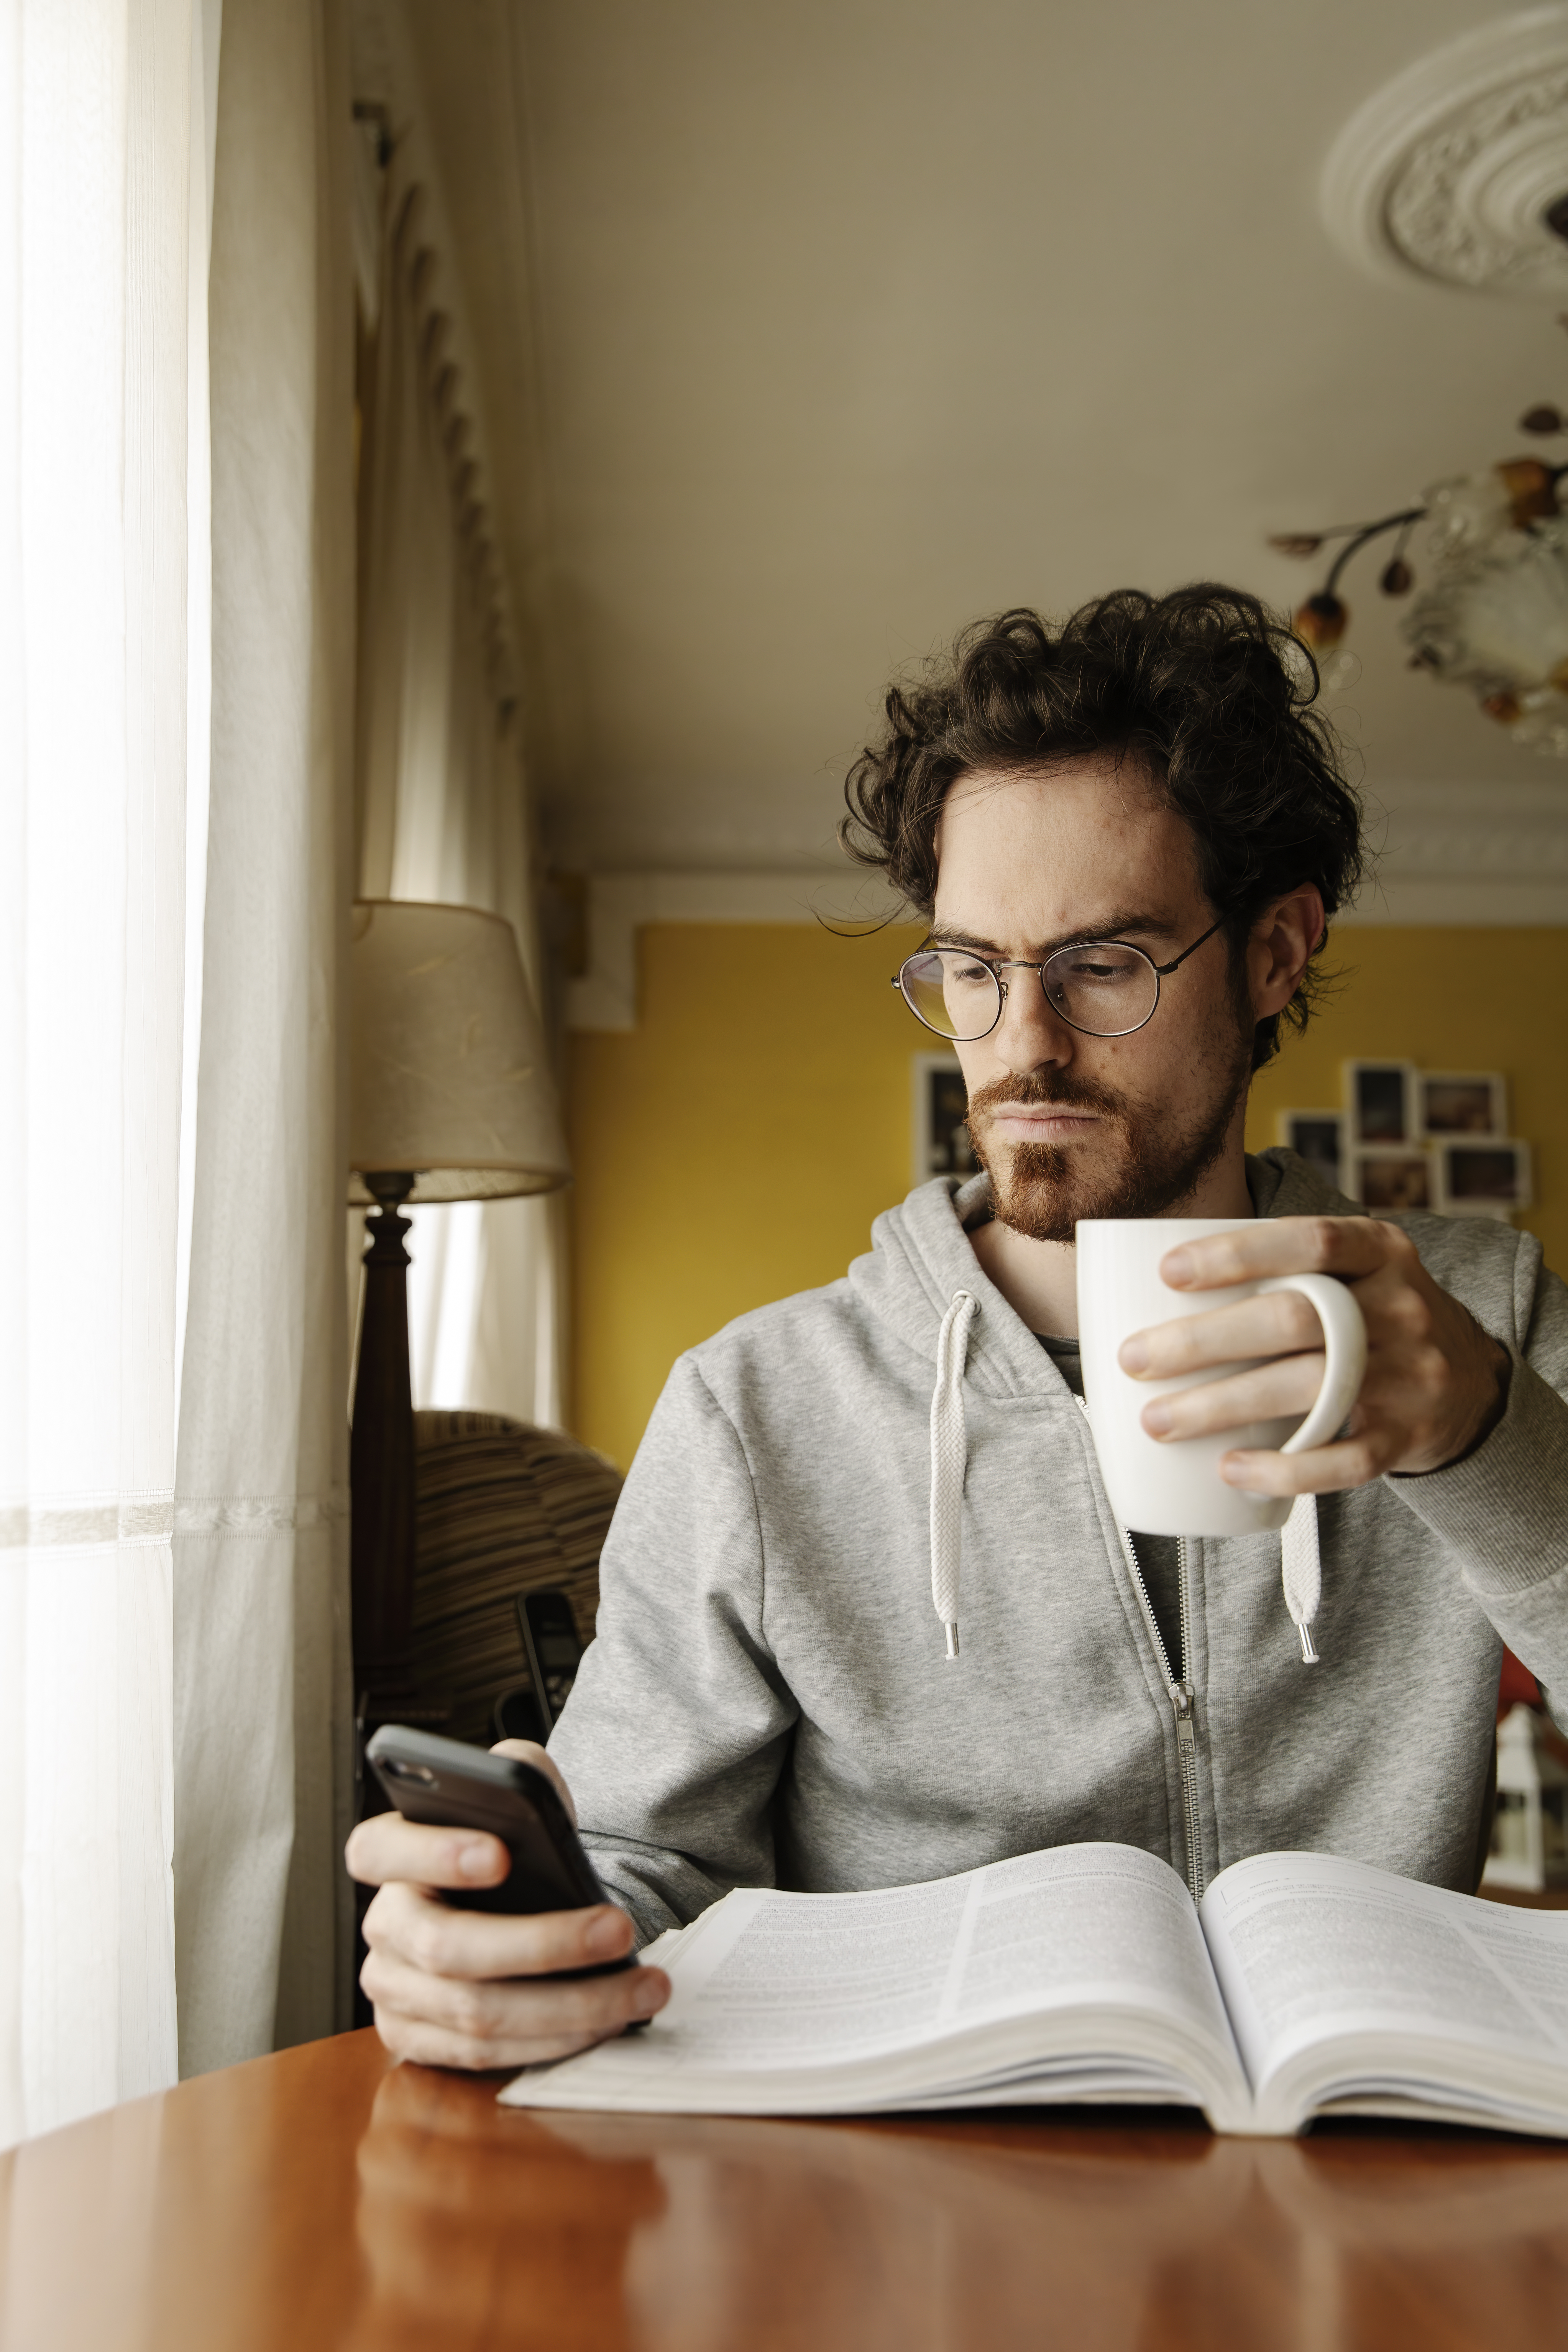 Man reads news on smartphone with book open